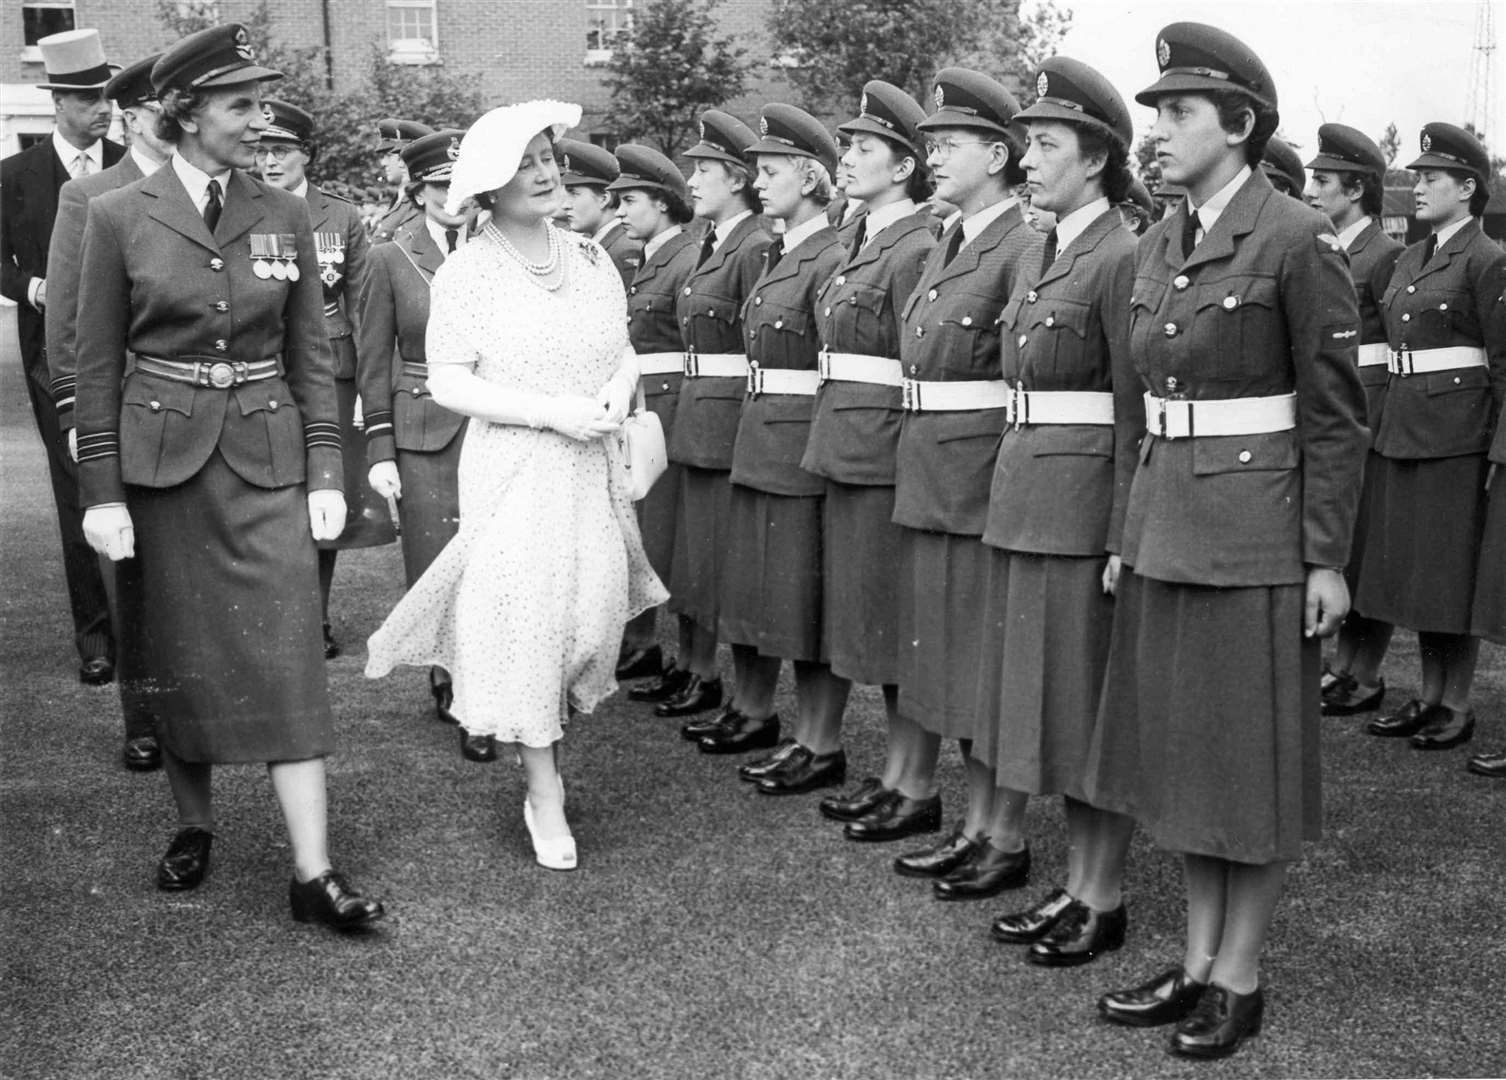 The Queen Mother and the Duchess of Gloucester spent four hours touring the WRAF Station at Hawkinge in July 1955. Among the cadets they met were four pioneers of the Burmese Women's Air Force who were training at the site